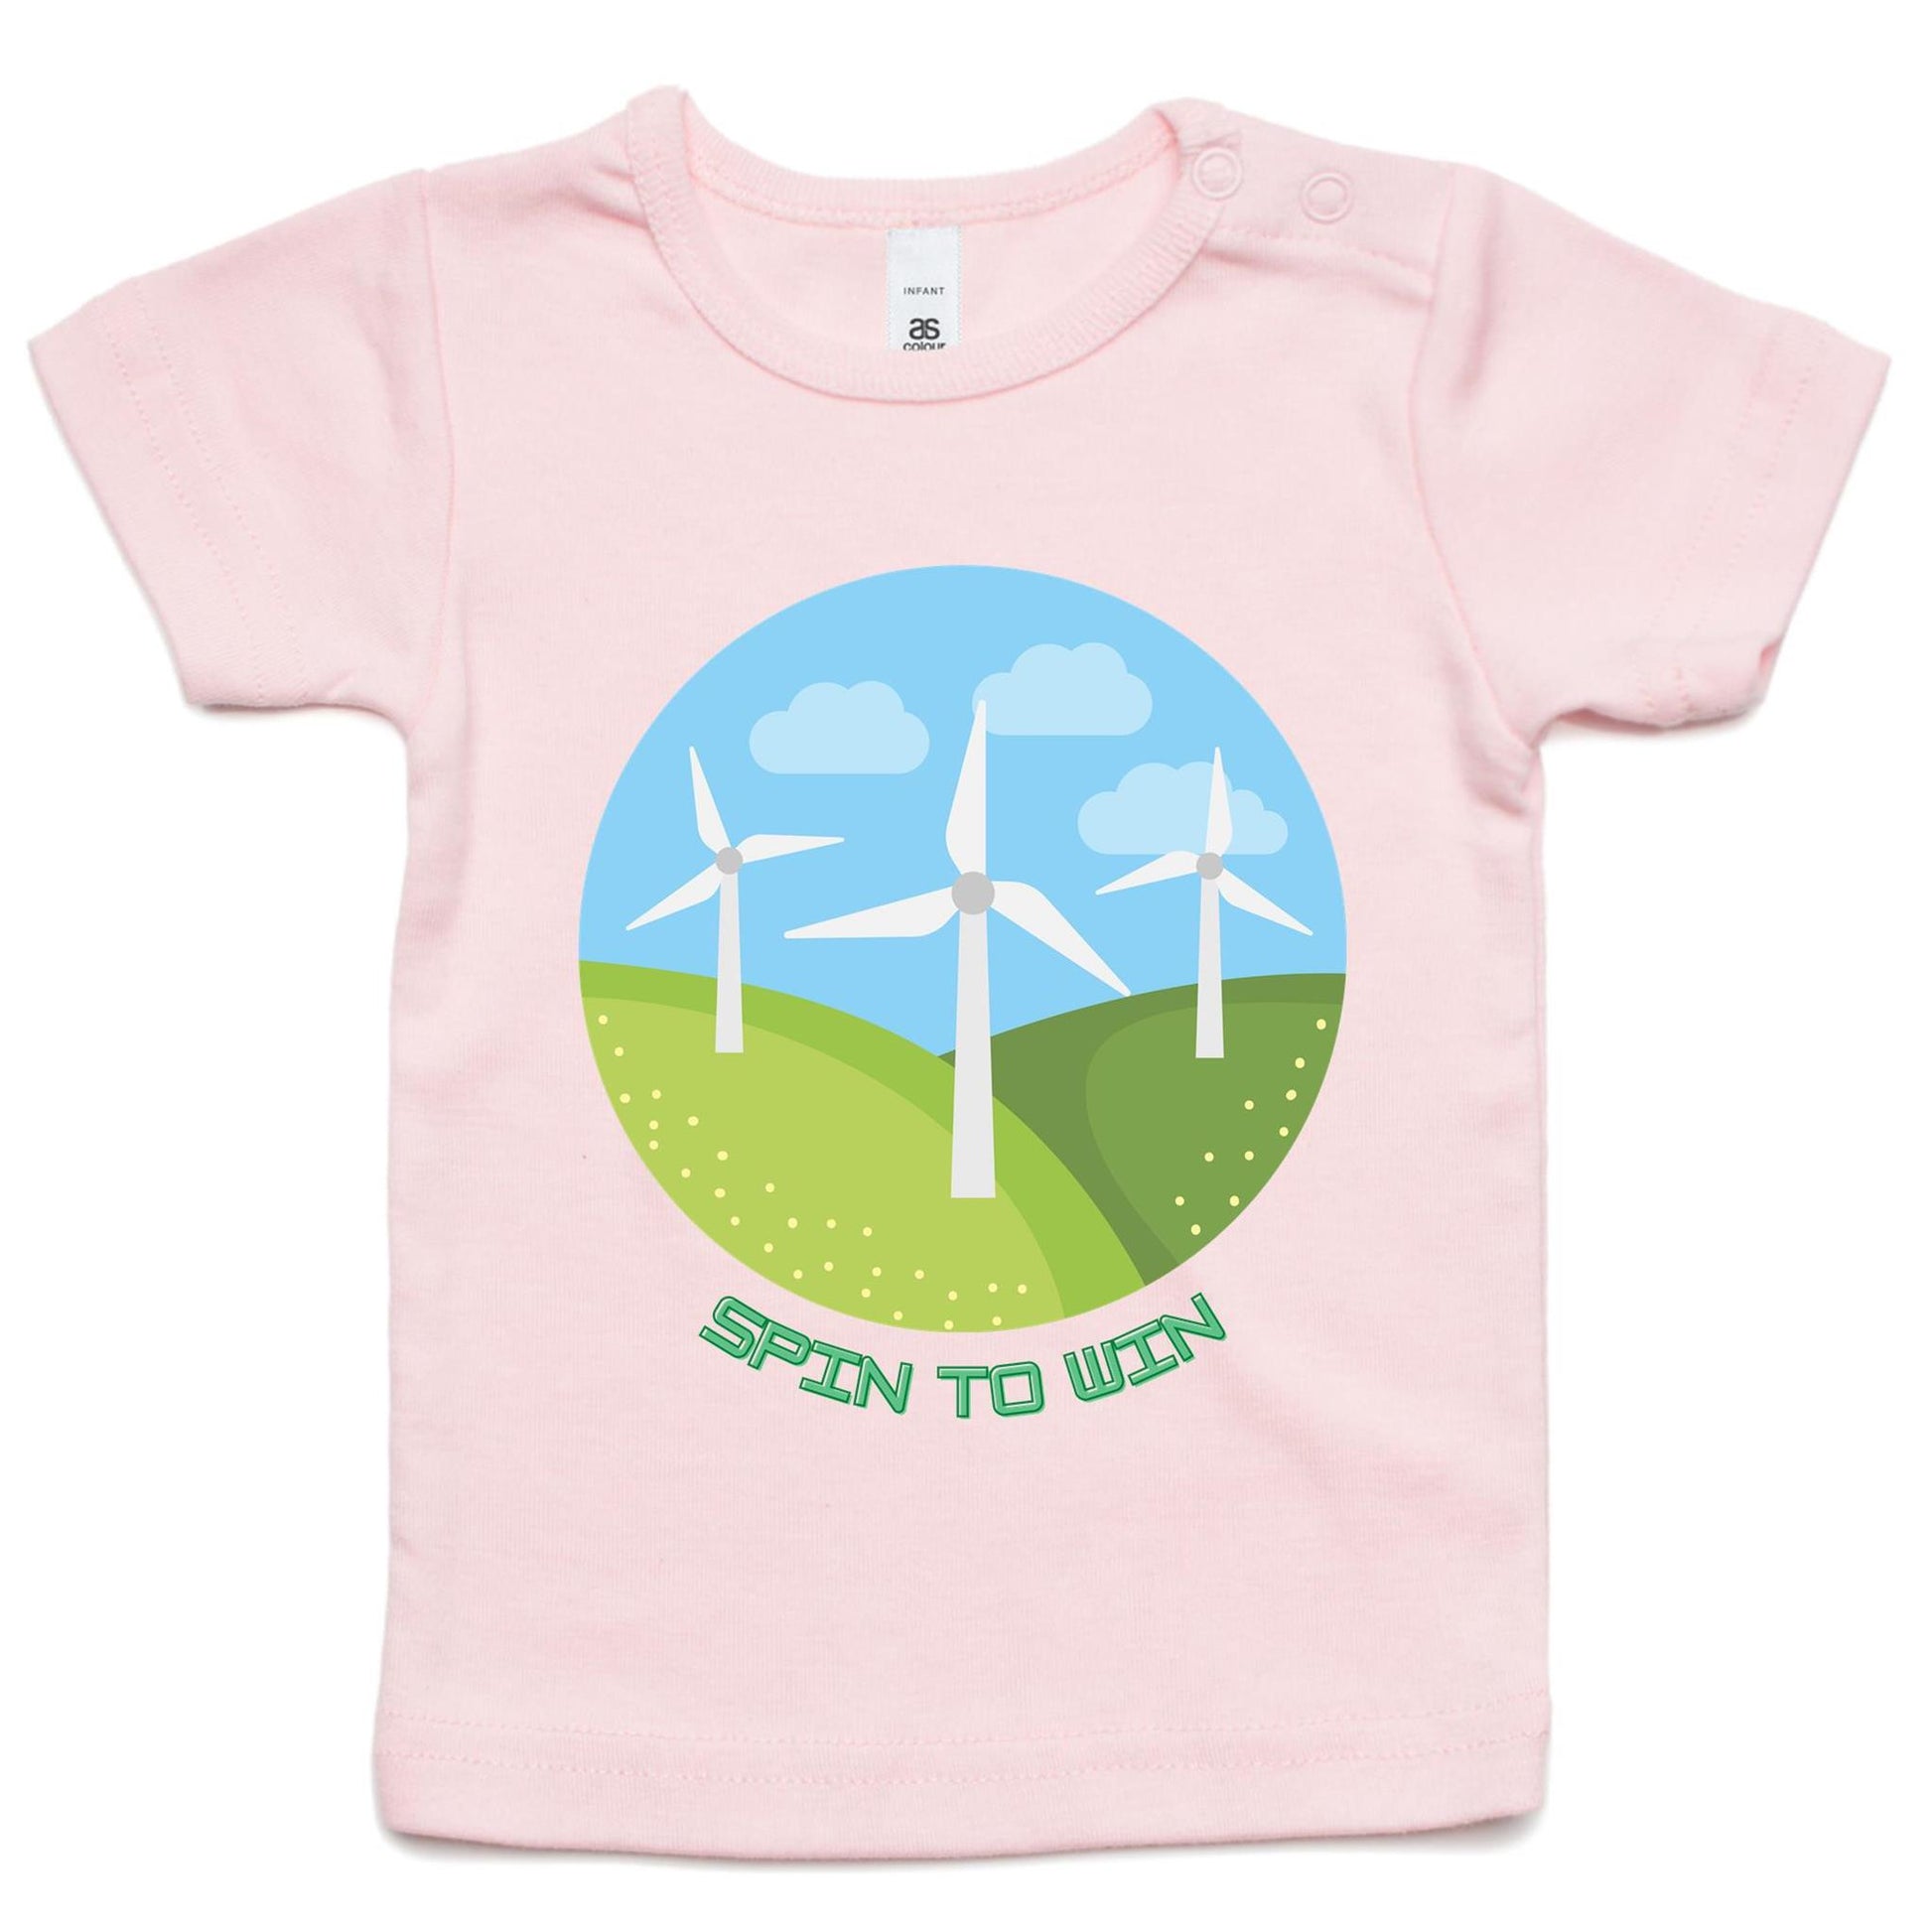 Spin To Win - Baby T-shirt Pink Baby T-shirt Environment kids